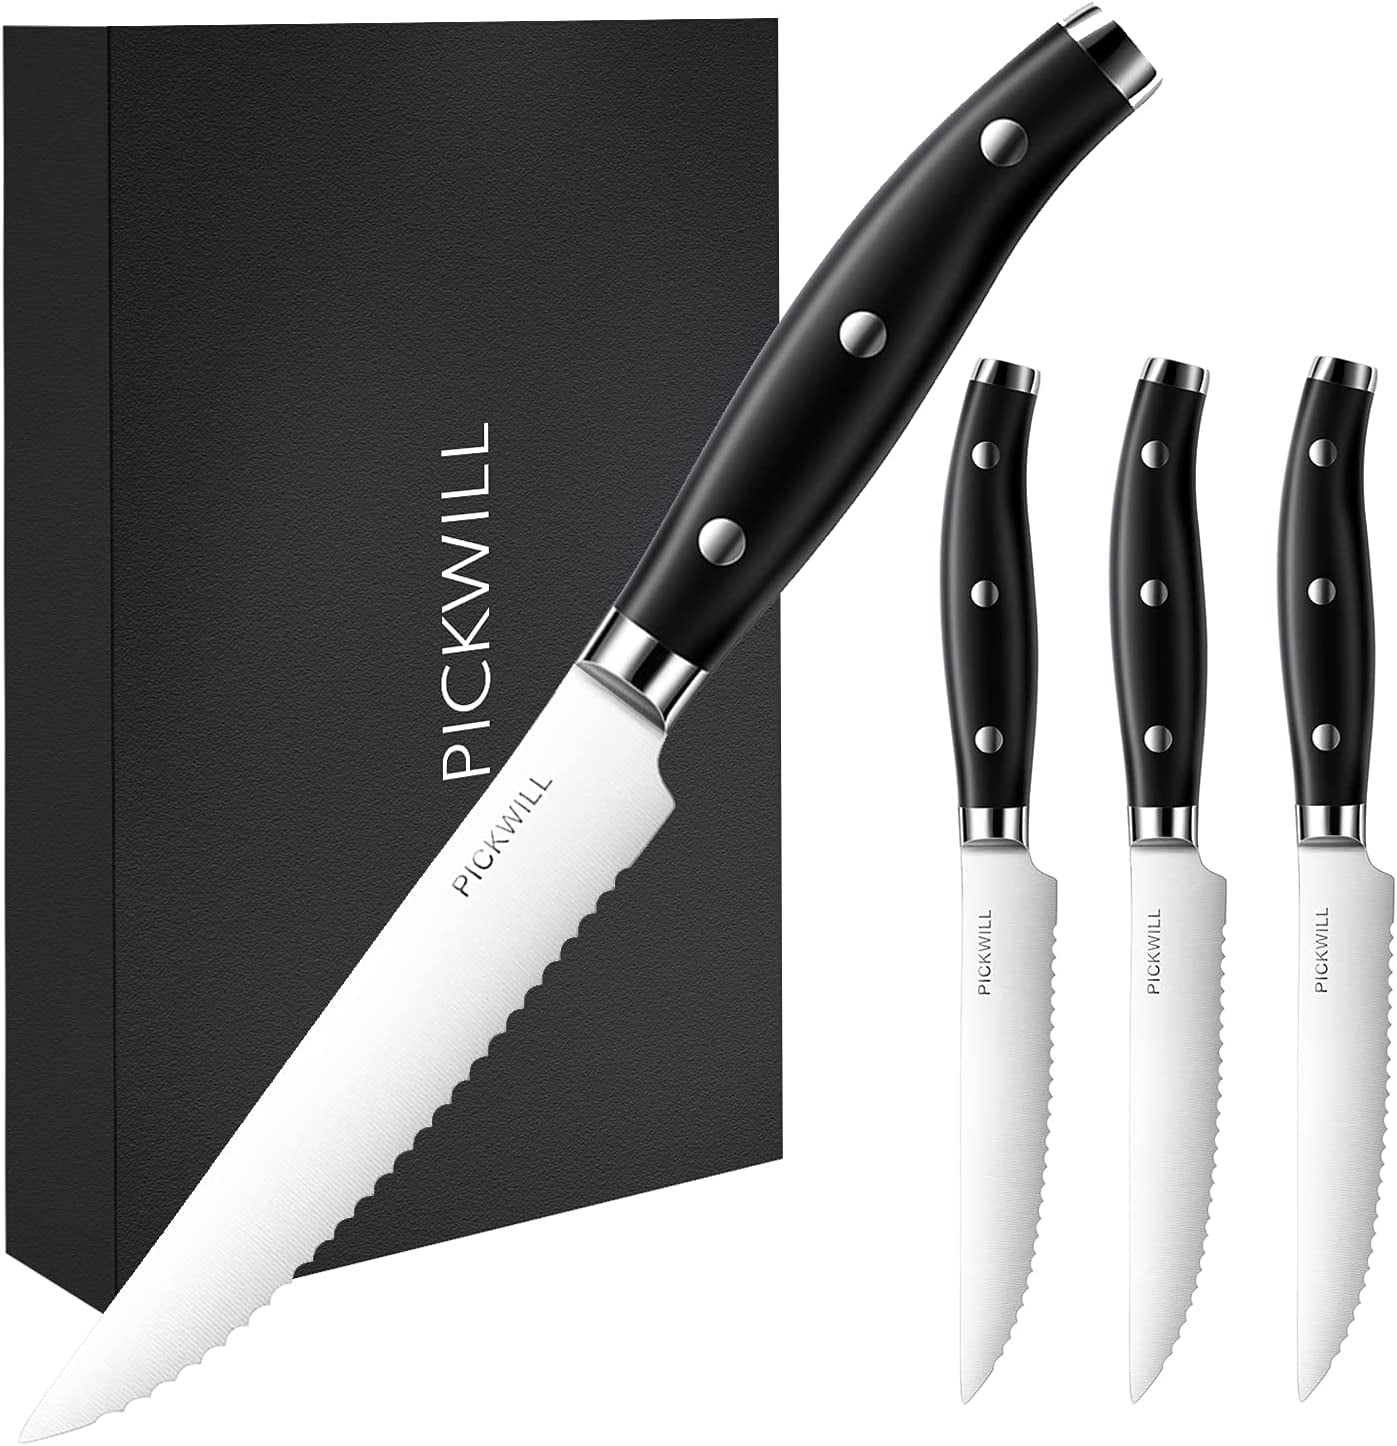 PICKWILL Steak Knives Set of 4, 4.5 Serrated Classic Steak Knife Set, High  Carbon Stainless Steel Kitchen Steak Knives with Ergonomic Handle, Durable